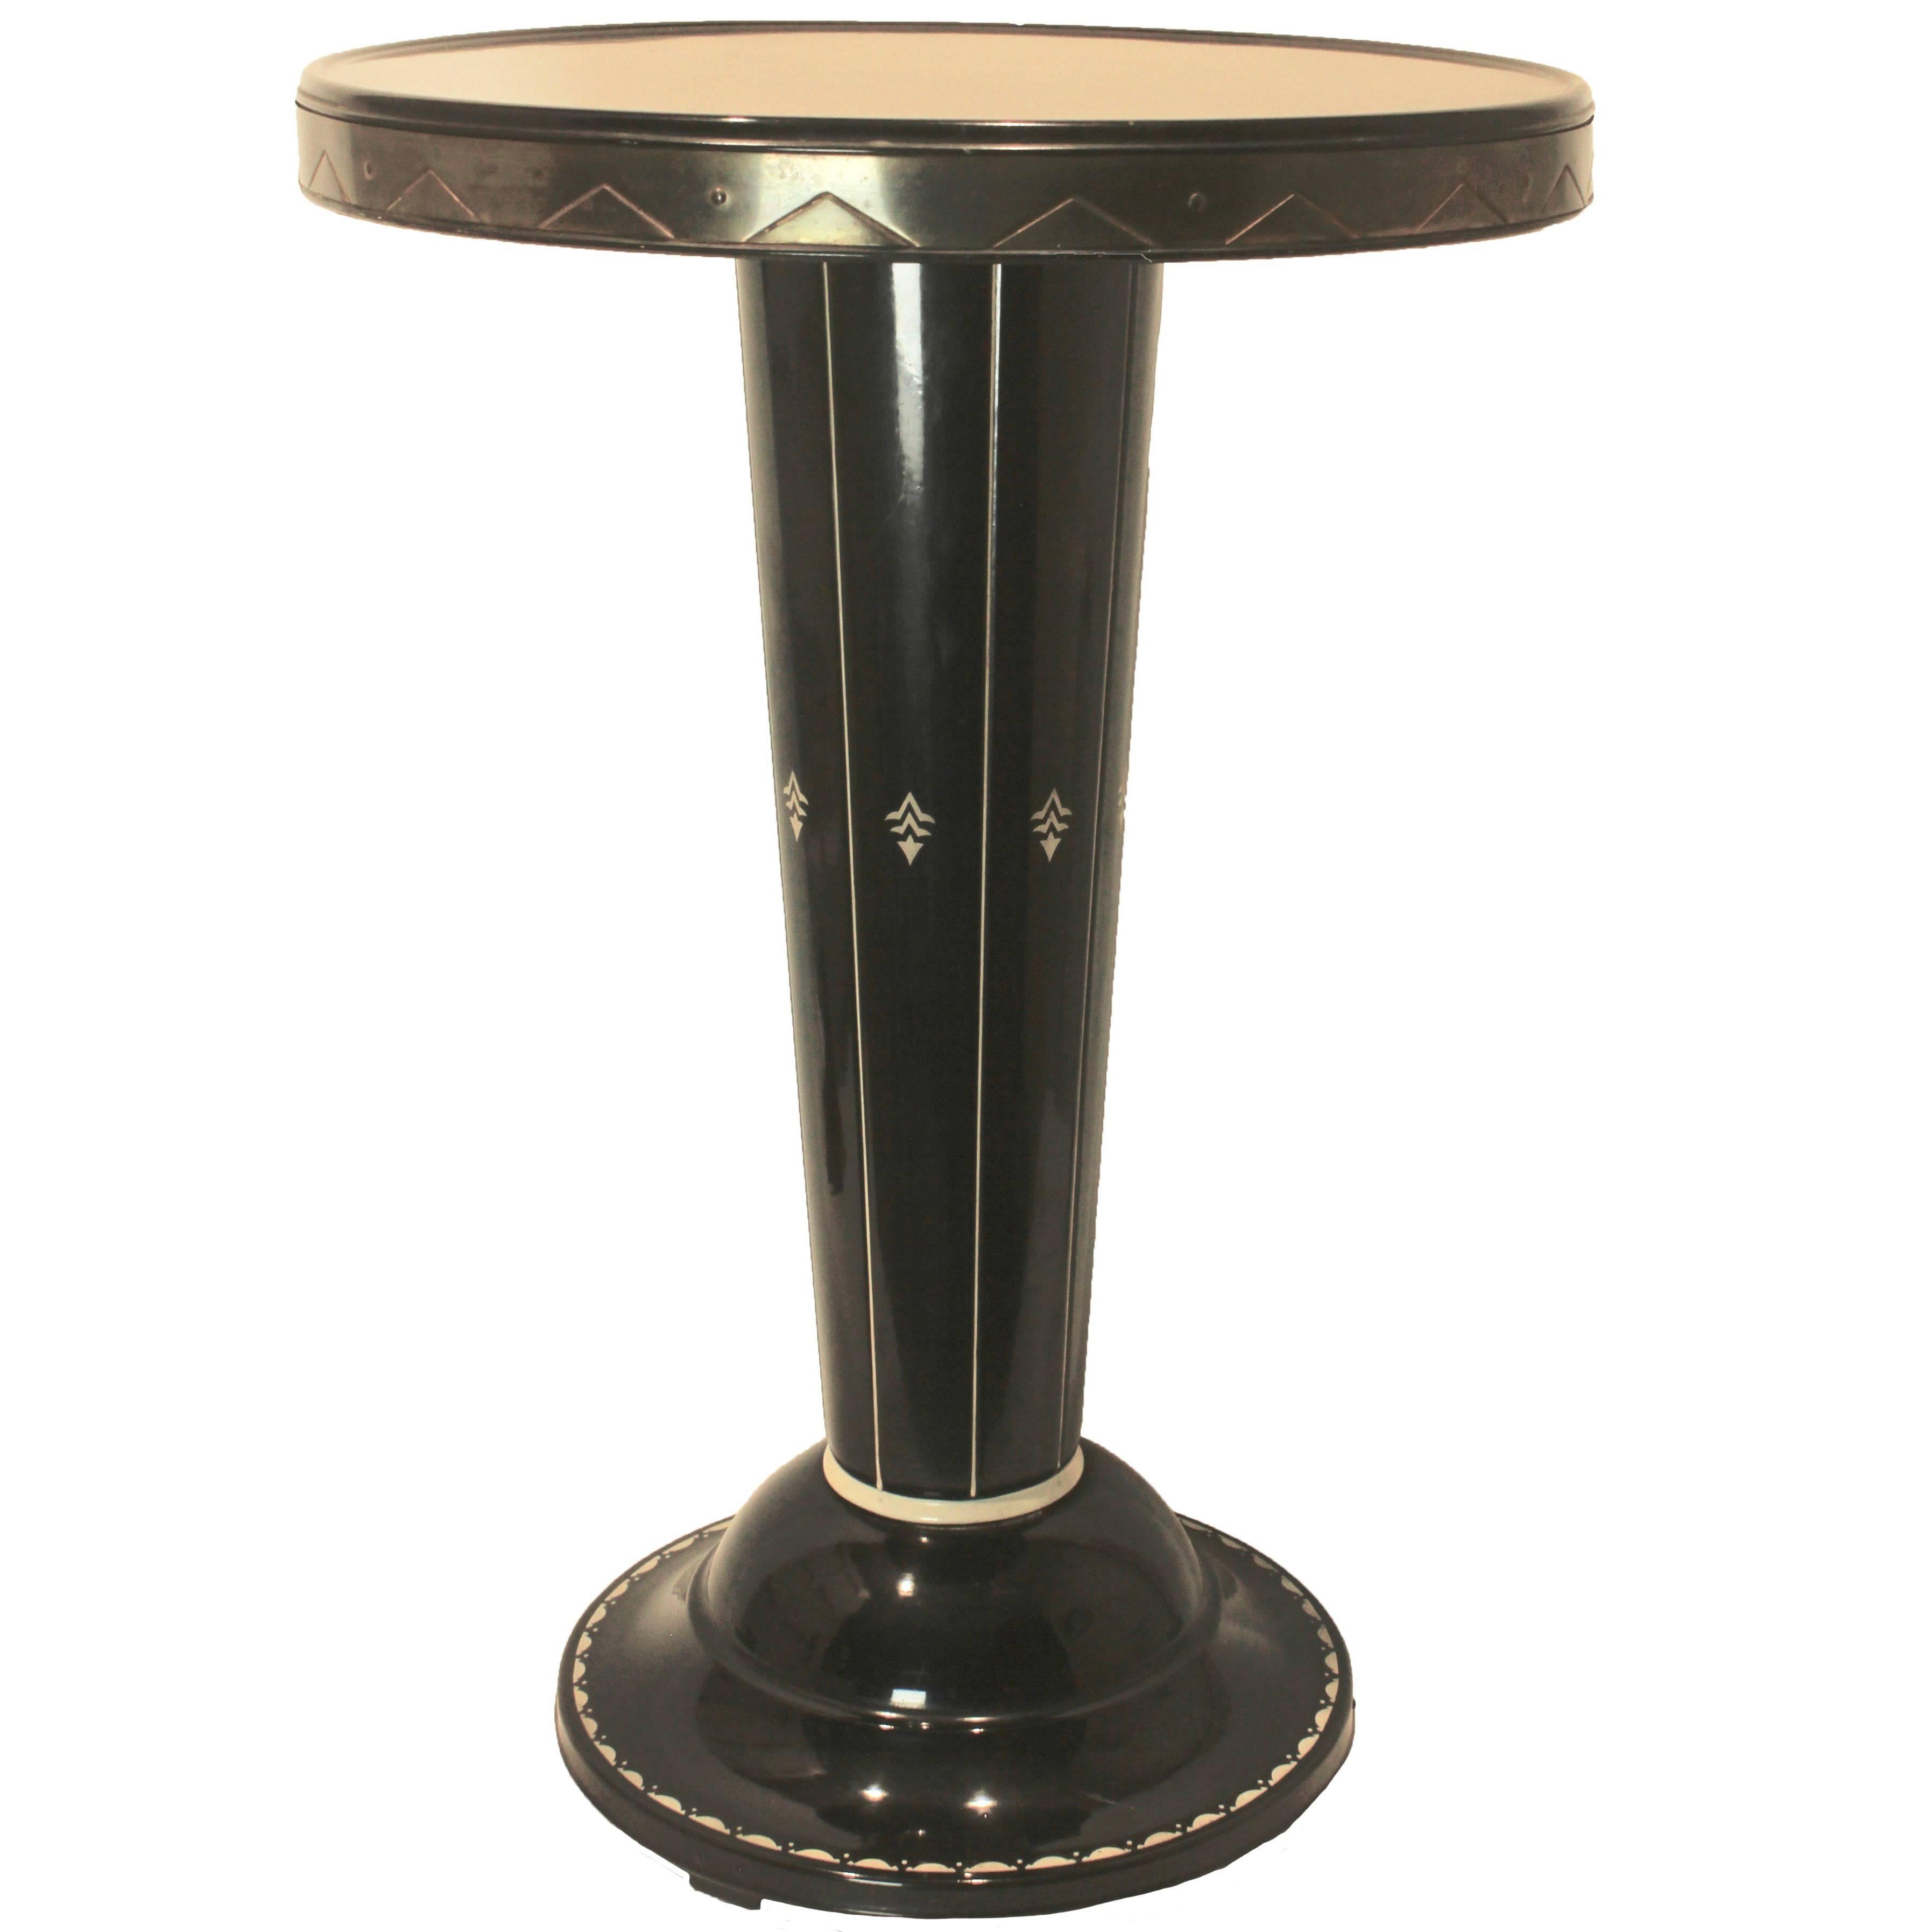 Cast Iron Metal Enamel Side Table with Stylized Design